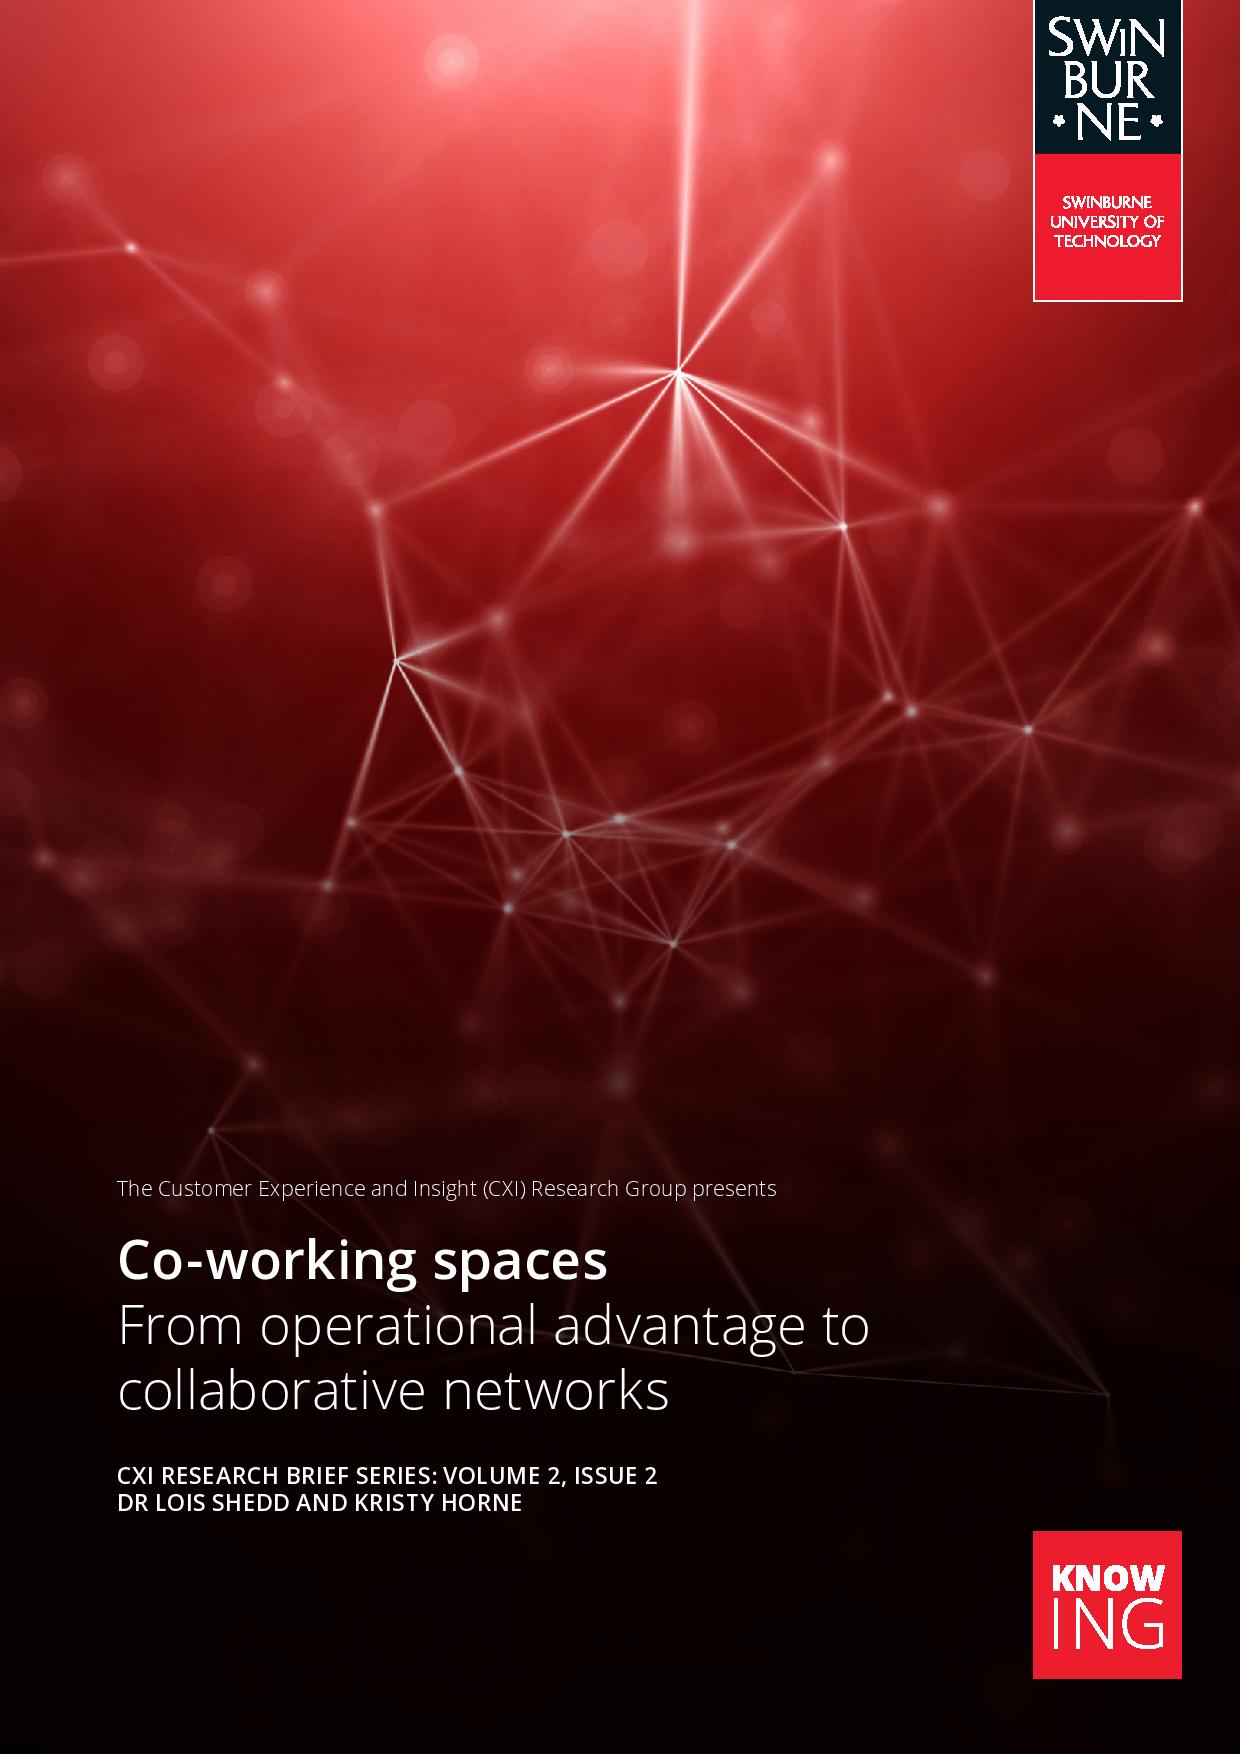 Co-working spaces: From operational advantage to collaborative networks